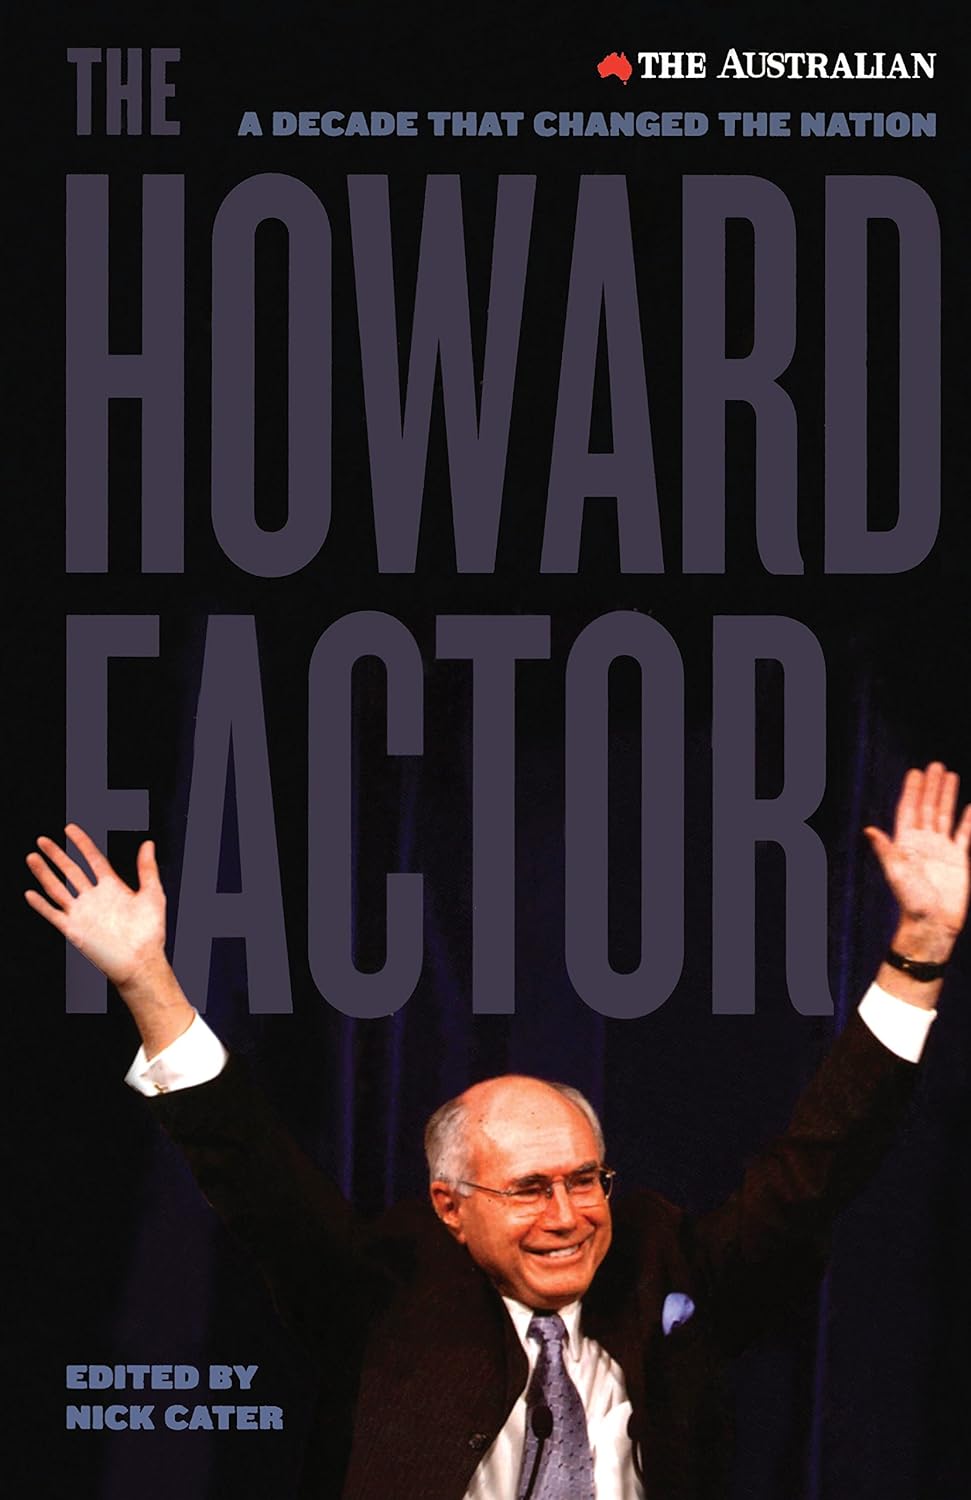 The Howard Factor: A decade that transformed the nation